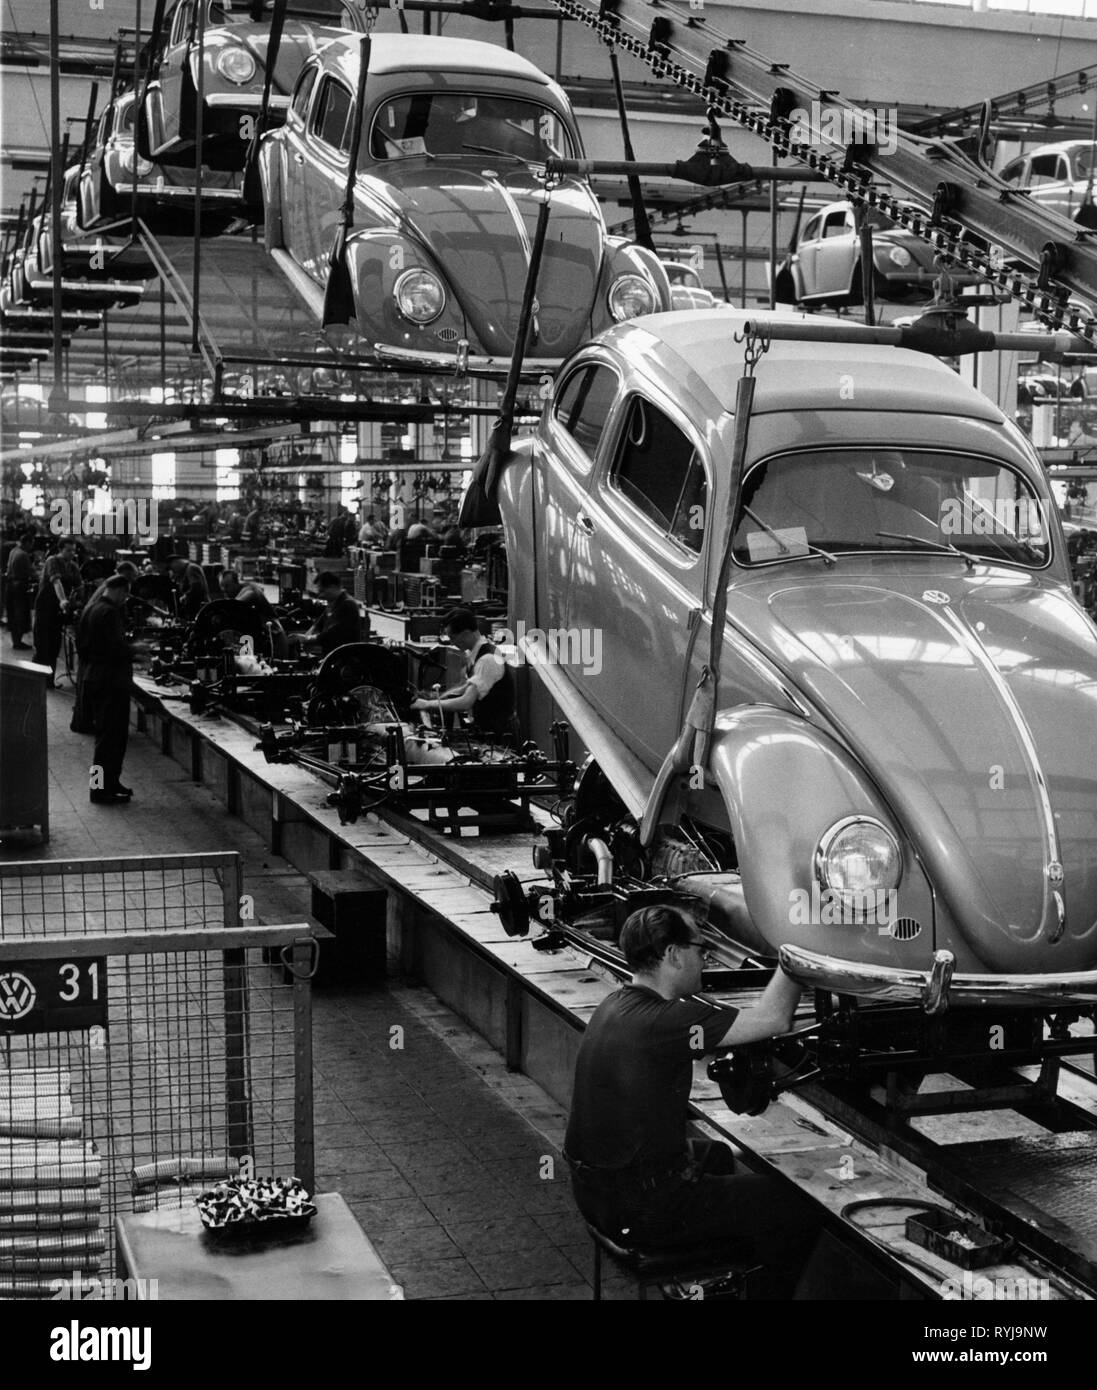 industry, 1950s and 1960s, Volkswagen plant, final assembly line, car industry, Germany, Additional-Rights-Clearance-Info-Not-Available Stock Photo